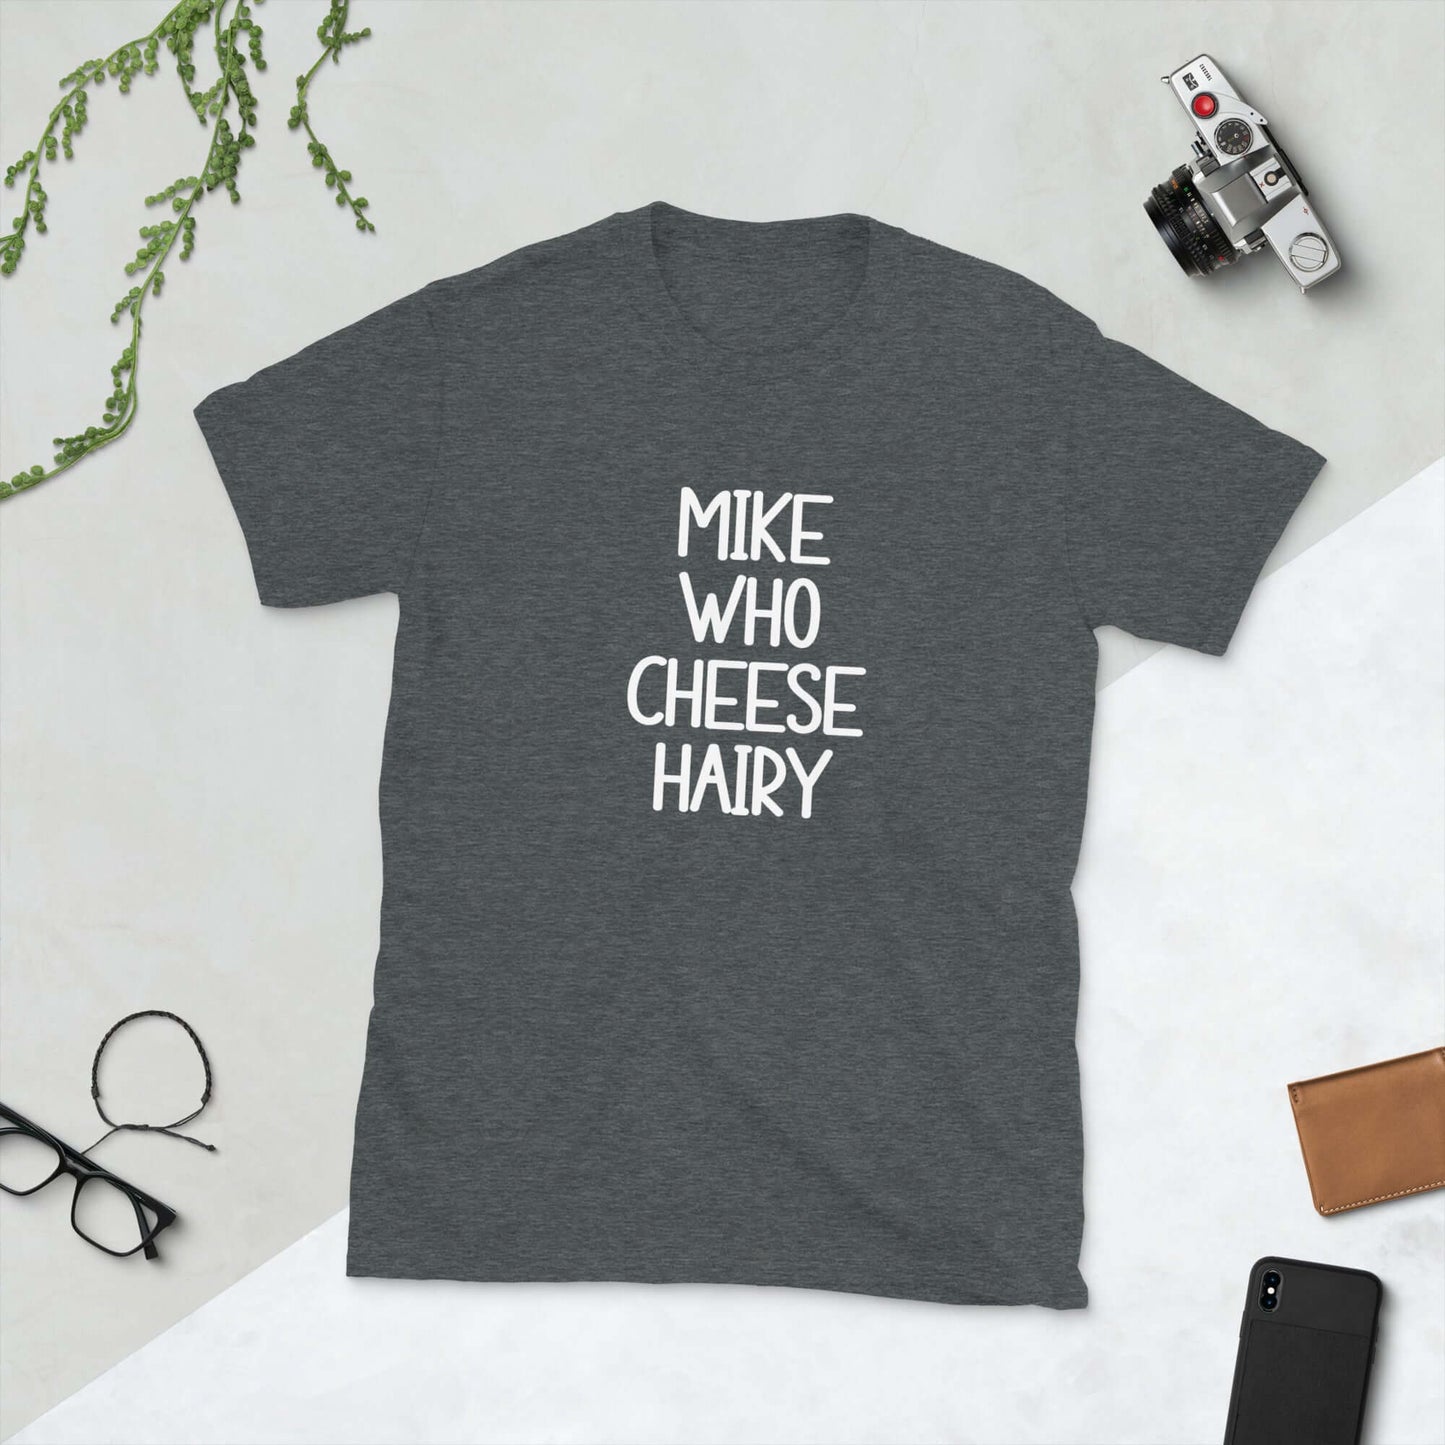 Dark grey pun t-shirt with the words Mike who cheese hairy printed on the front.